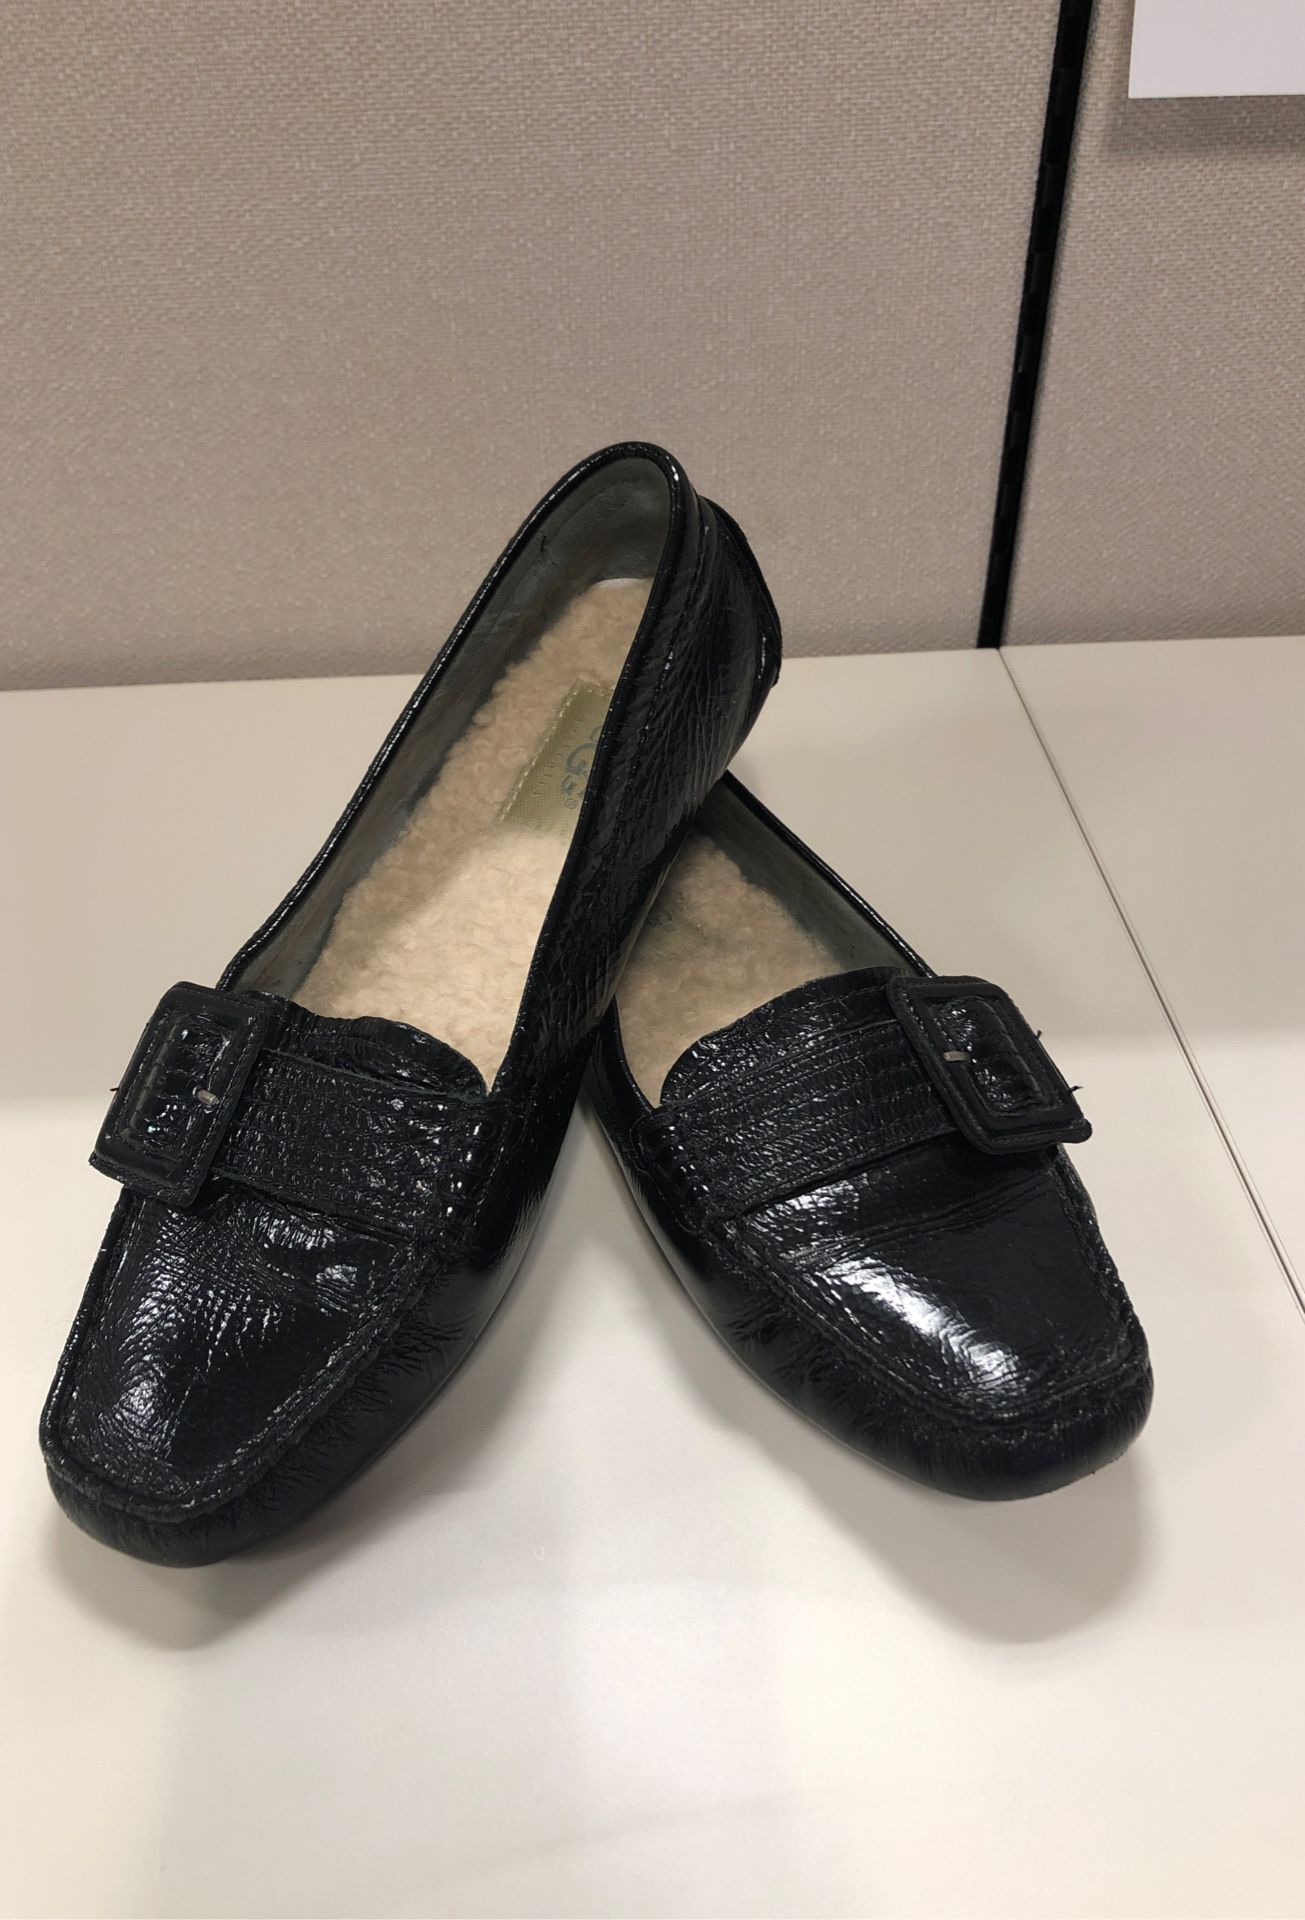 Black Leather UGG Loafers with buckle size 7 1/2 women